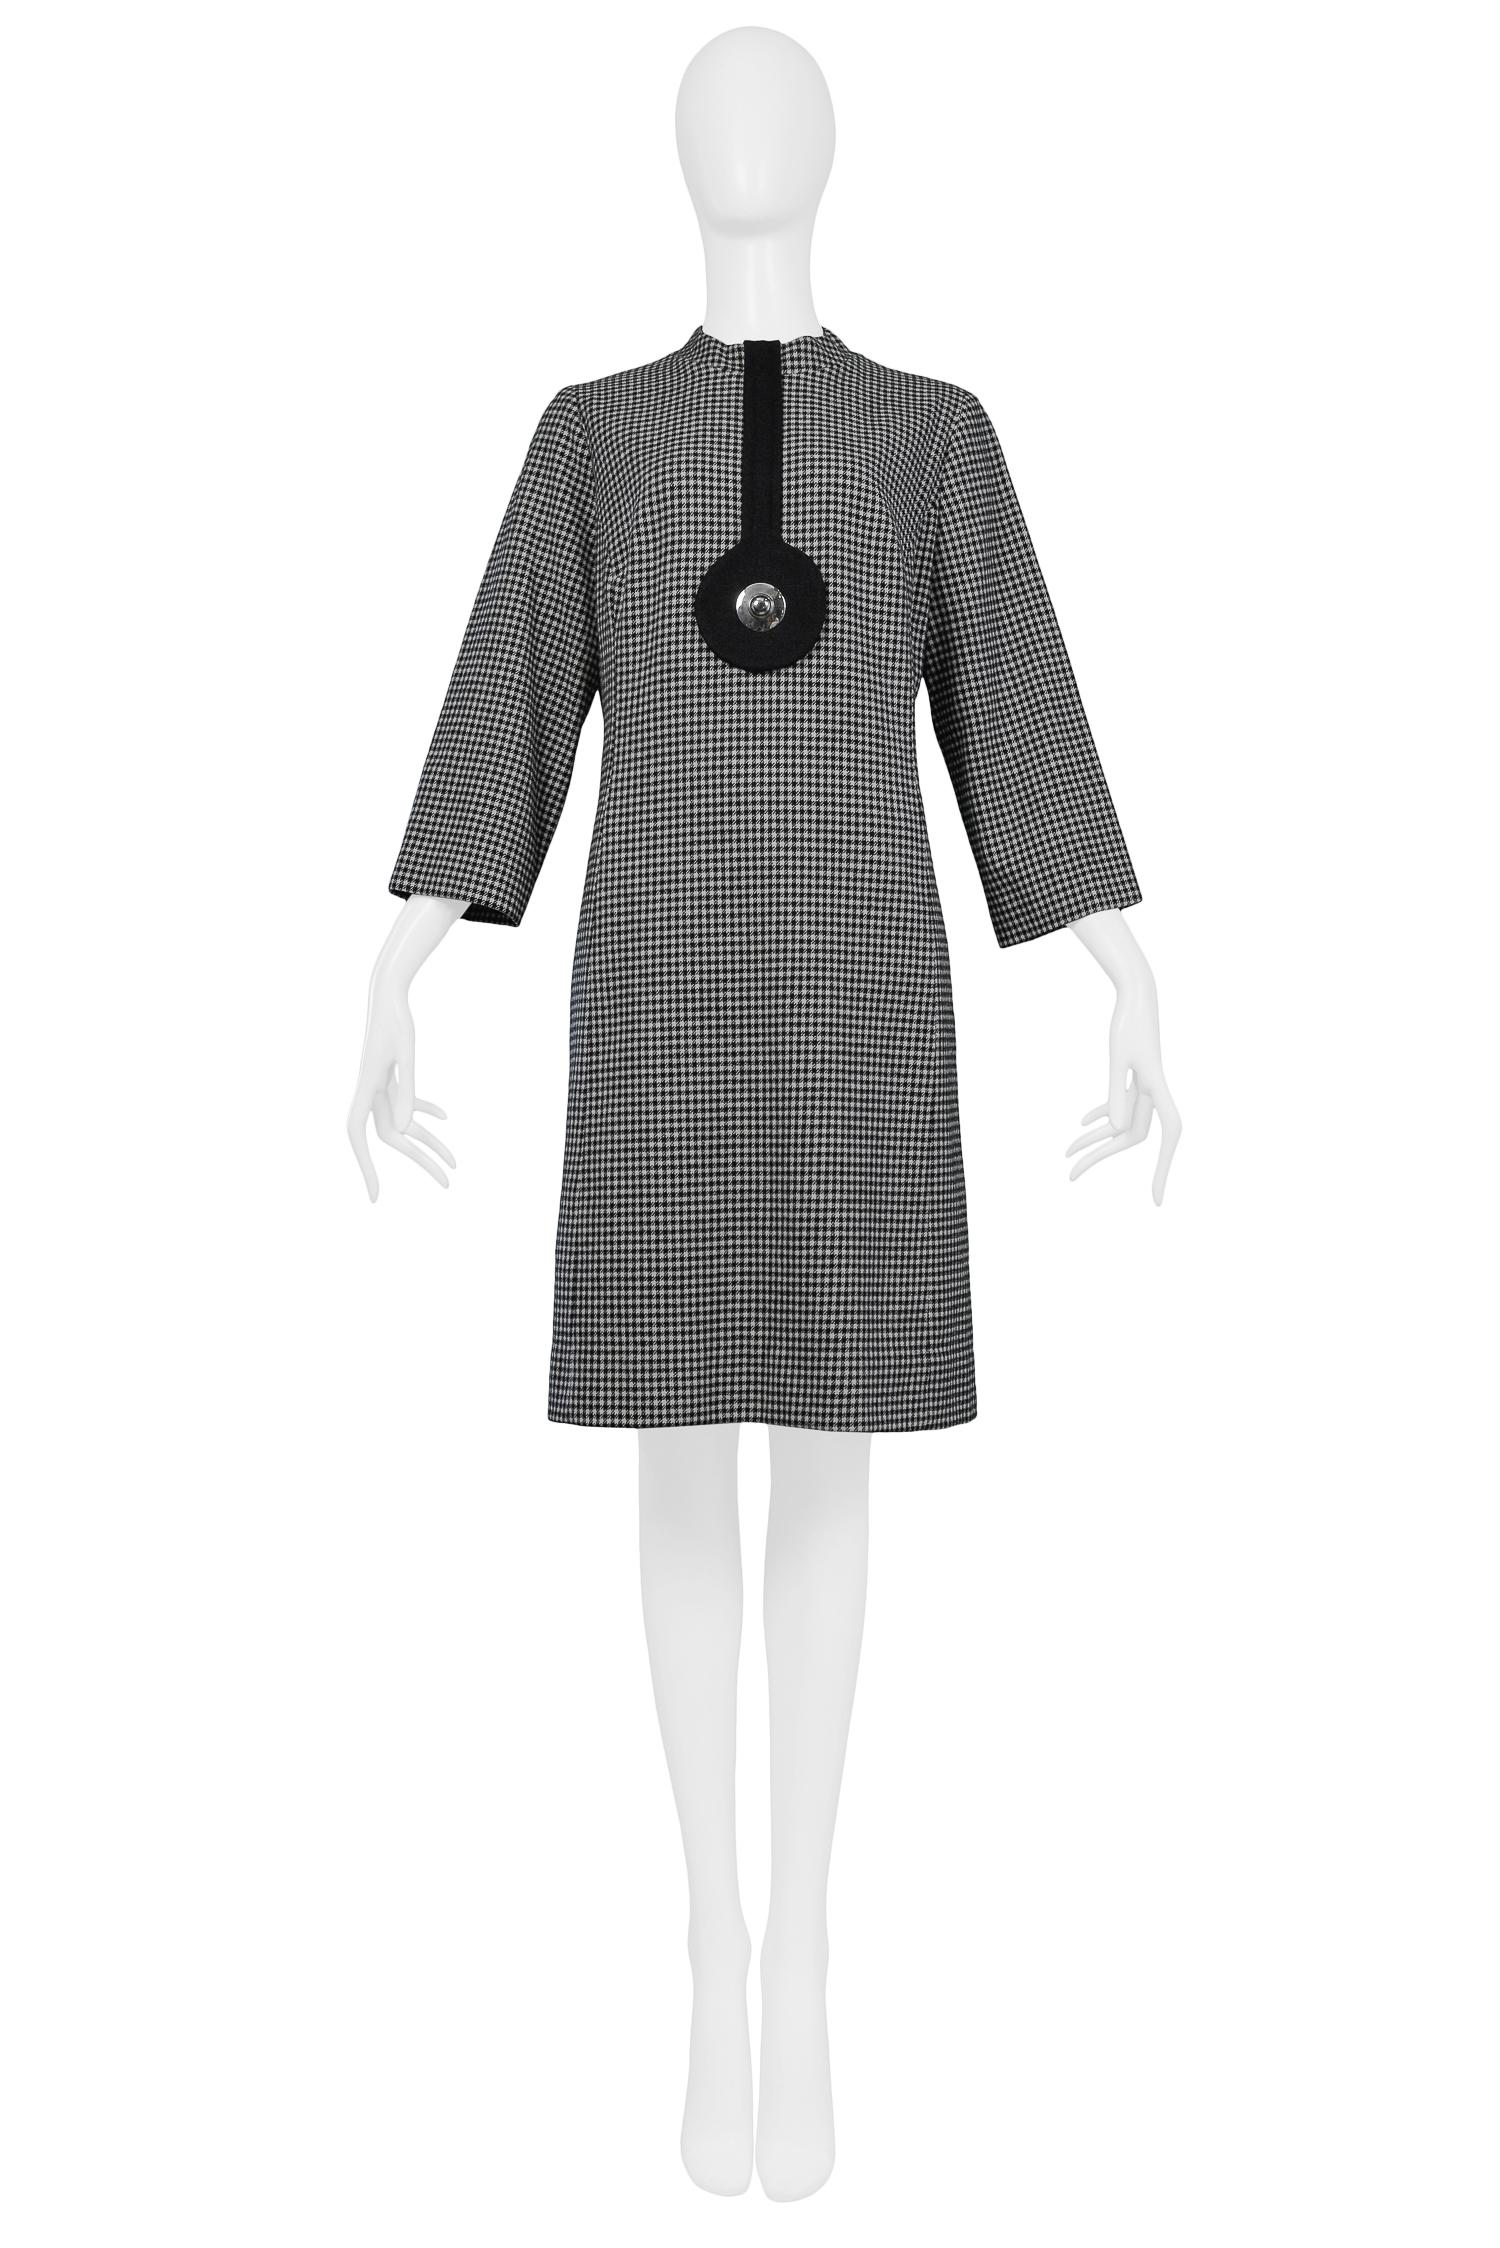 Vintage Pierre Cardin black & white wool houndstooth space age dress featuring 3/4 length sleeves and a high neck with silver metal mod detail. Circa 1968. 

Size: 4/6

Excellent Condition.